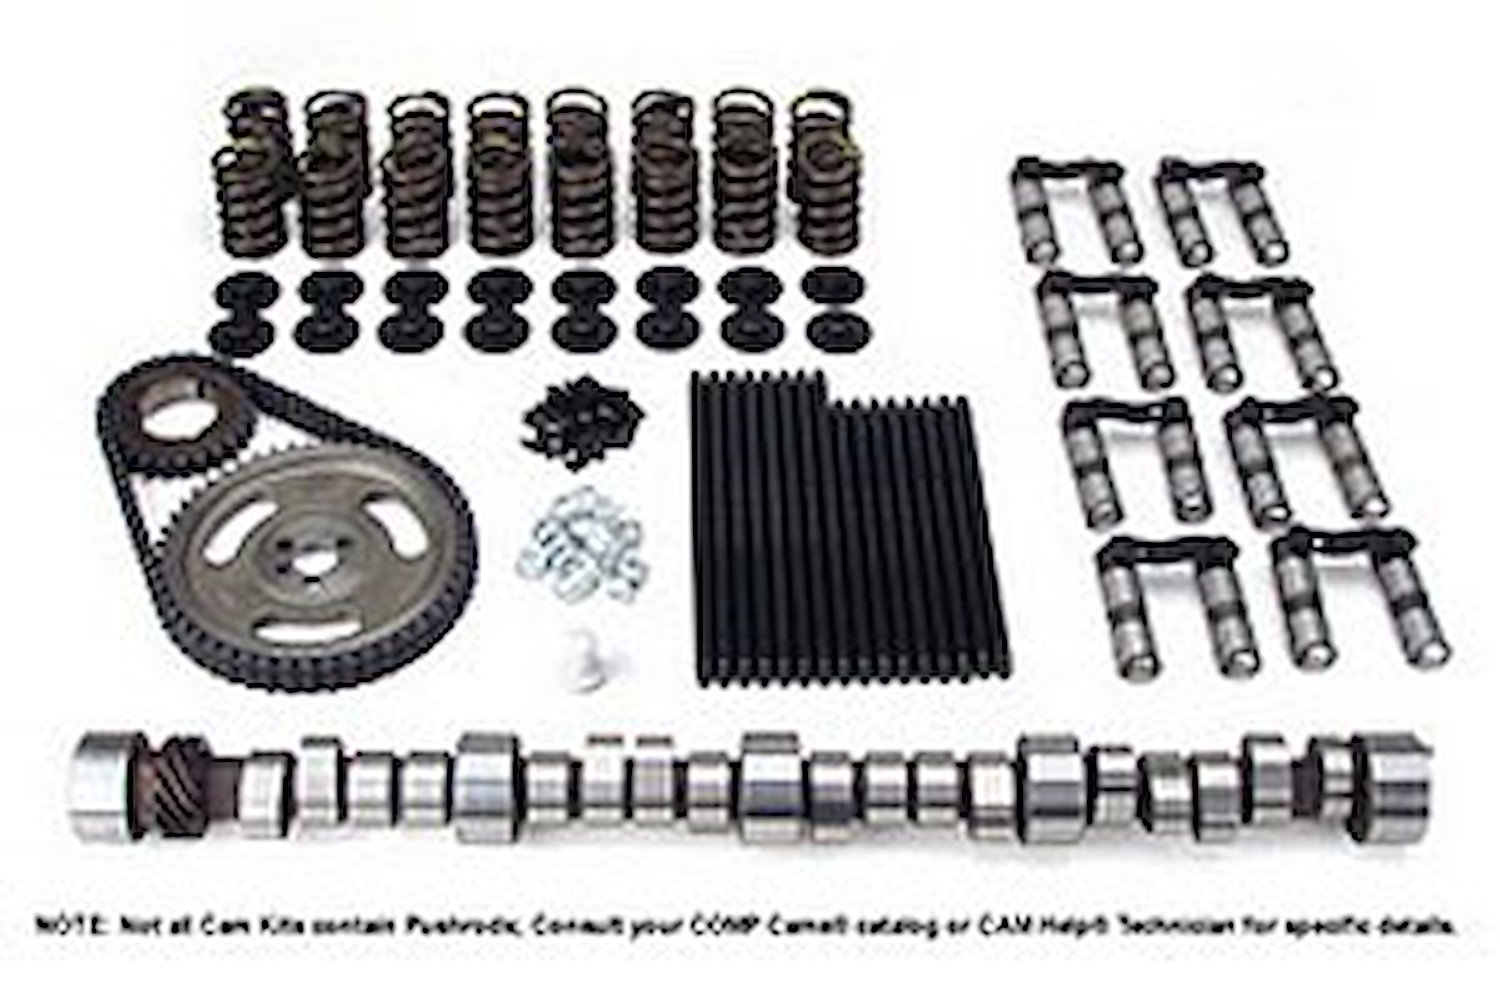 Magnum Hydraulic Roller Camshaft Complete Kit Chevy Small Block 262-400 Retro Fit Lift: .525"/.525"